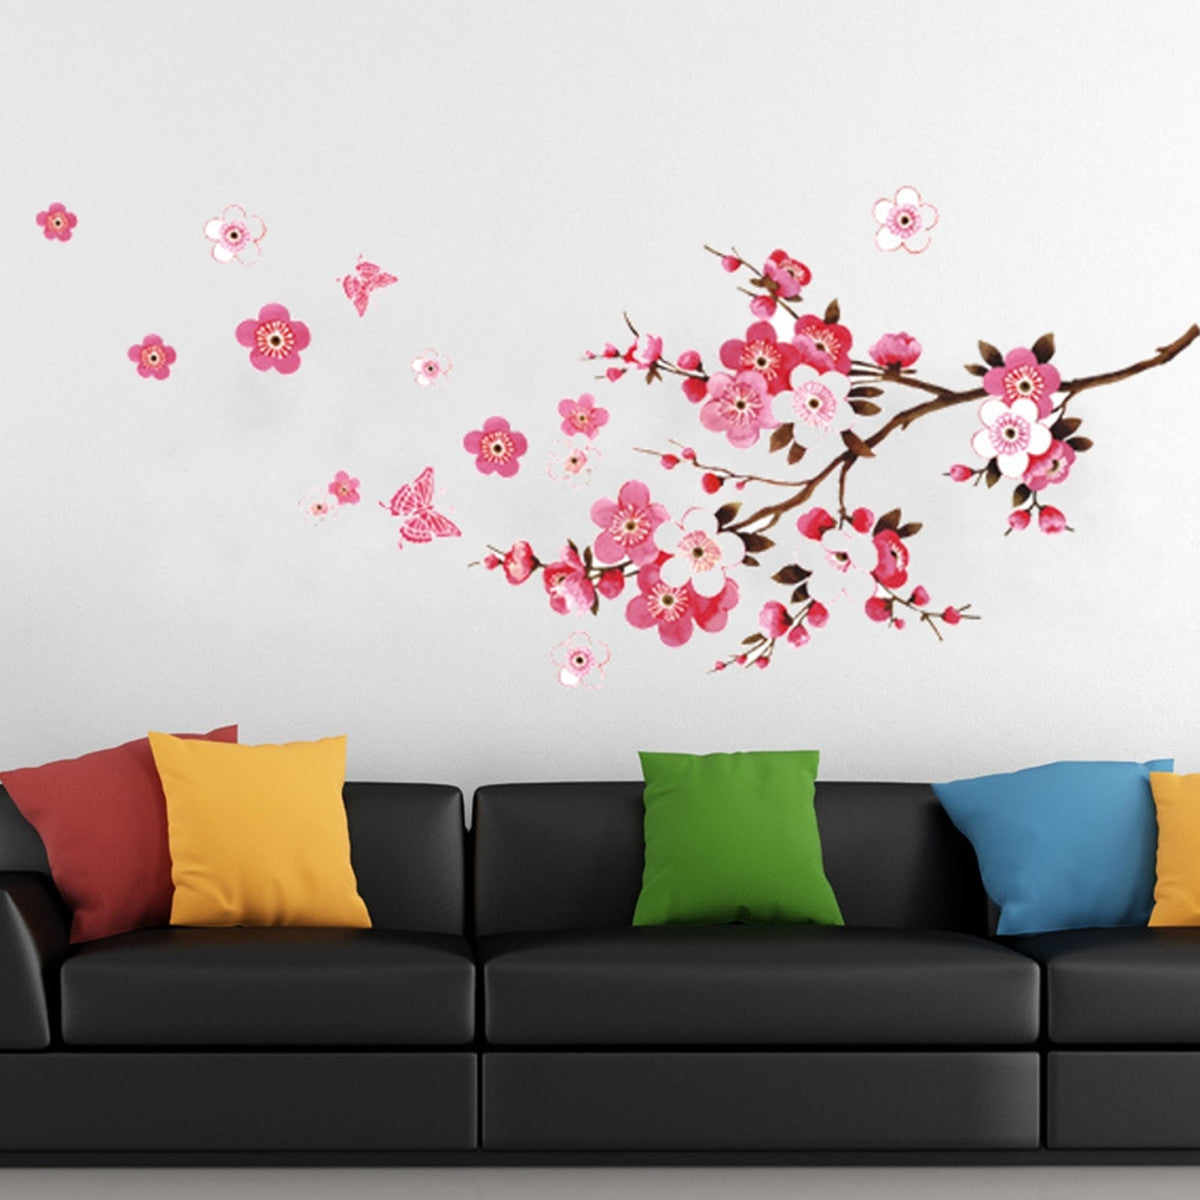 Large Cherry Blossom Flower Butterfly Tree Wall Sticker Art Decal Home Decor